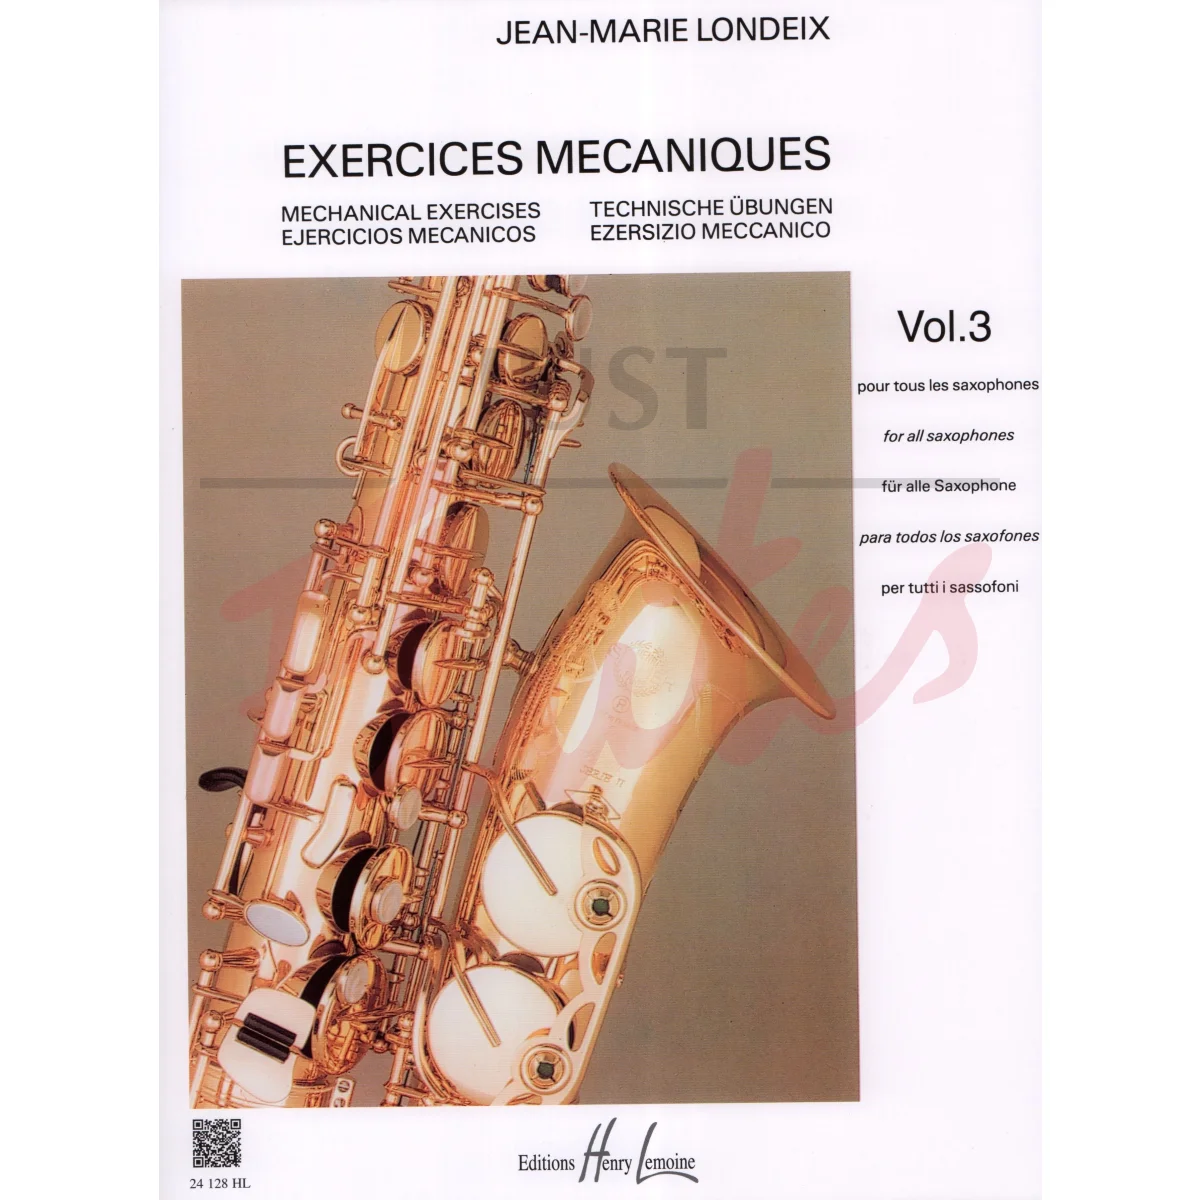 Mechanical Exercises Vol. 3 for all Saxophones